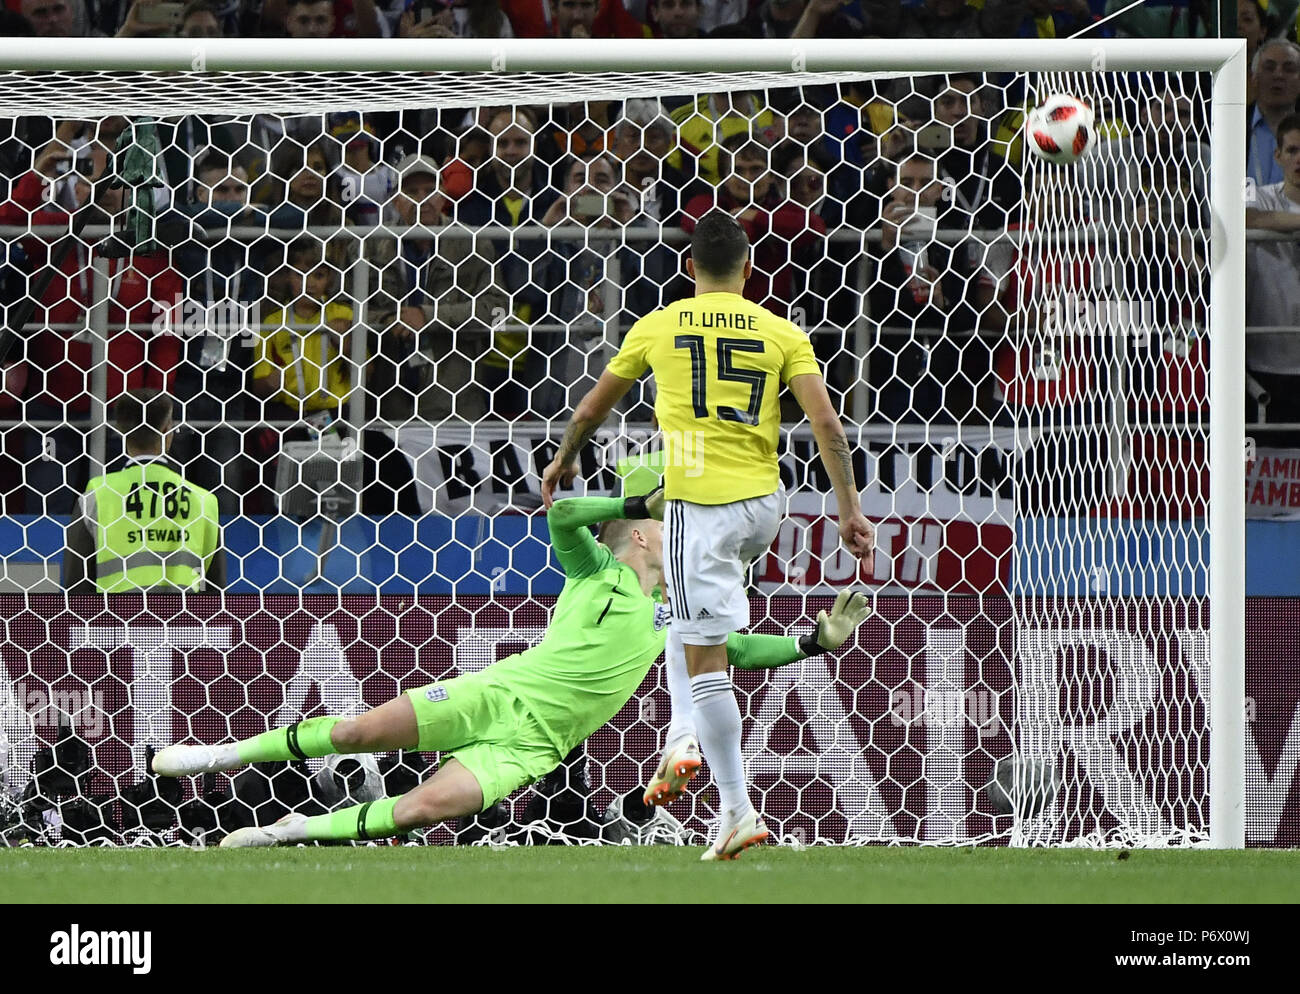 Moscow, Russia. 3rd July, 2018. Mateus Uribe (top) of Colombia misses a penalty kick during the penalty shootout of the 2018 FIFA World Cup round of 16 match between England and Colombia in Moscow, Russia, July 3, 2018. England won 5-4 (4-3 in penalty shootout) and advanced to the quarter-final. Credit: He Canling/Xinhua/Alamy Live News Stock Photo